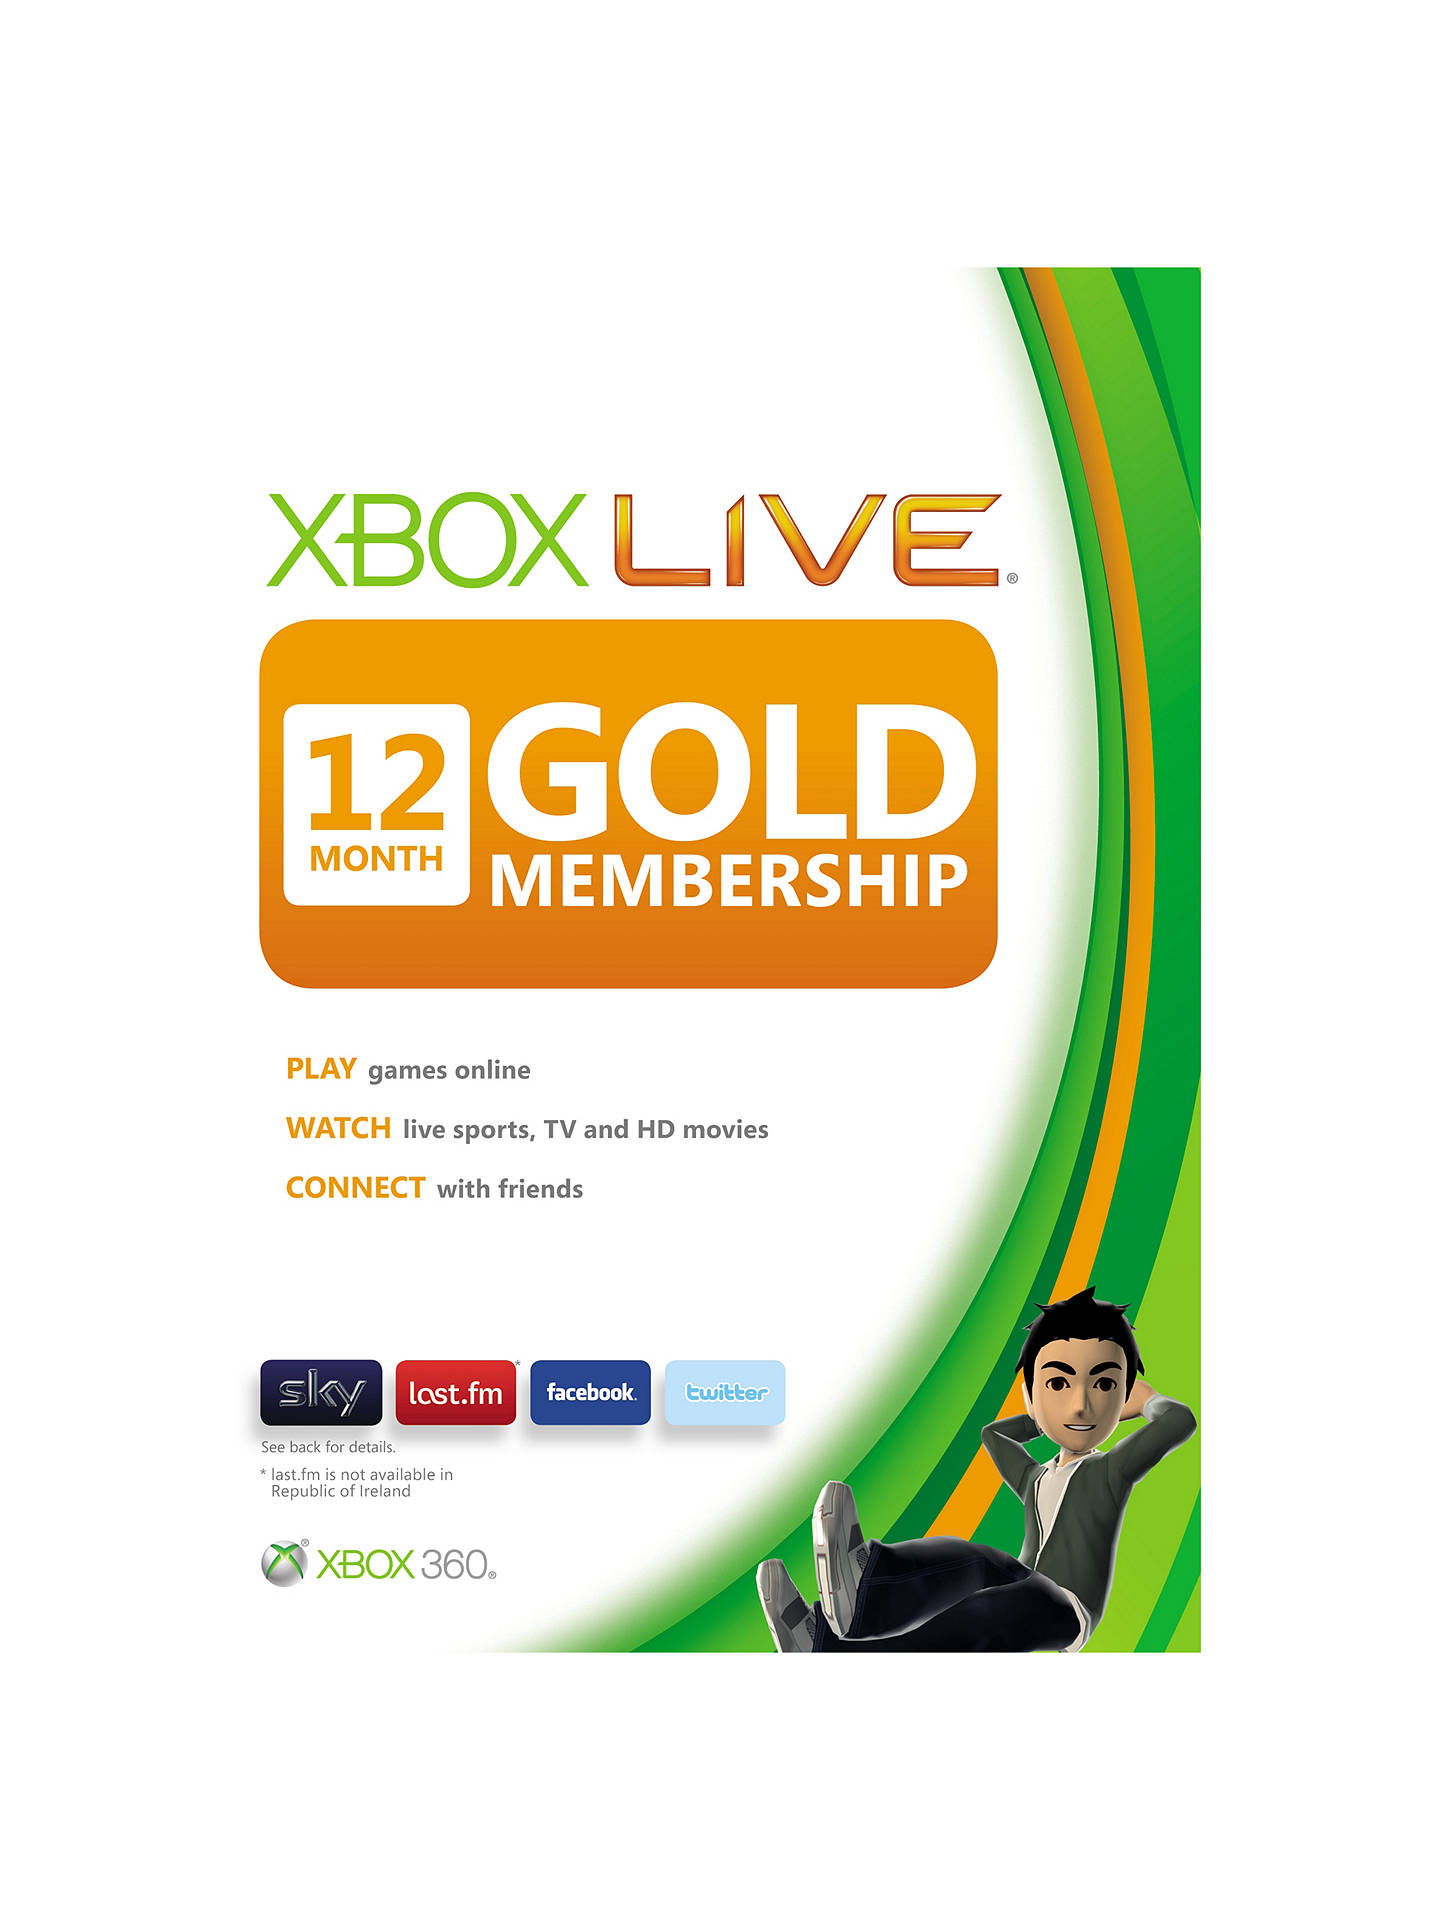 12 months of xbox live gold